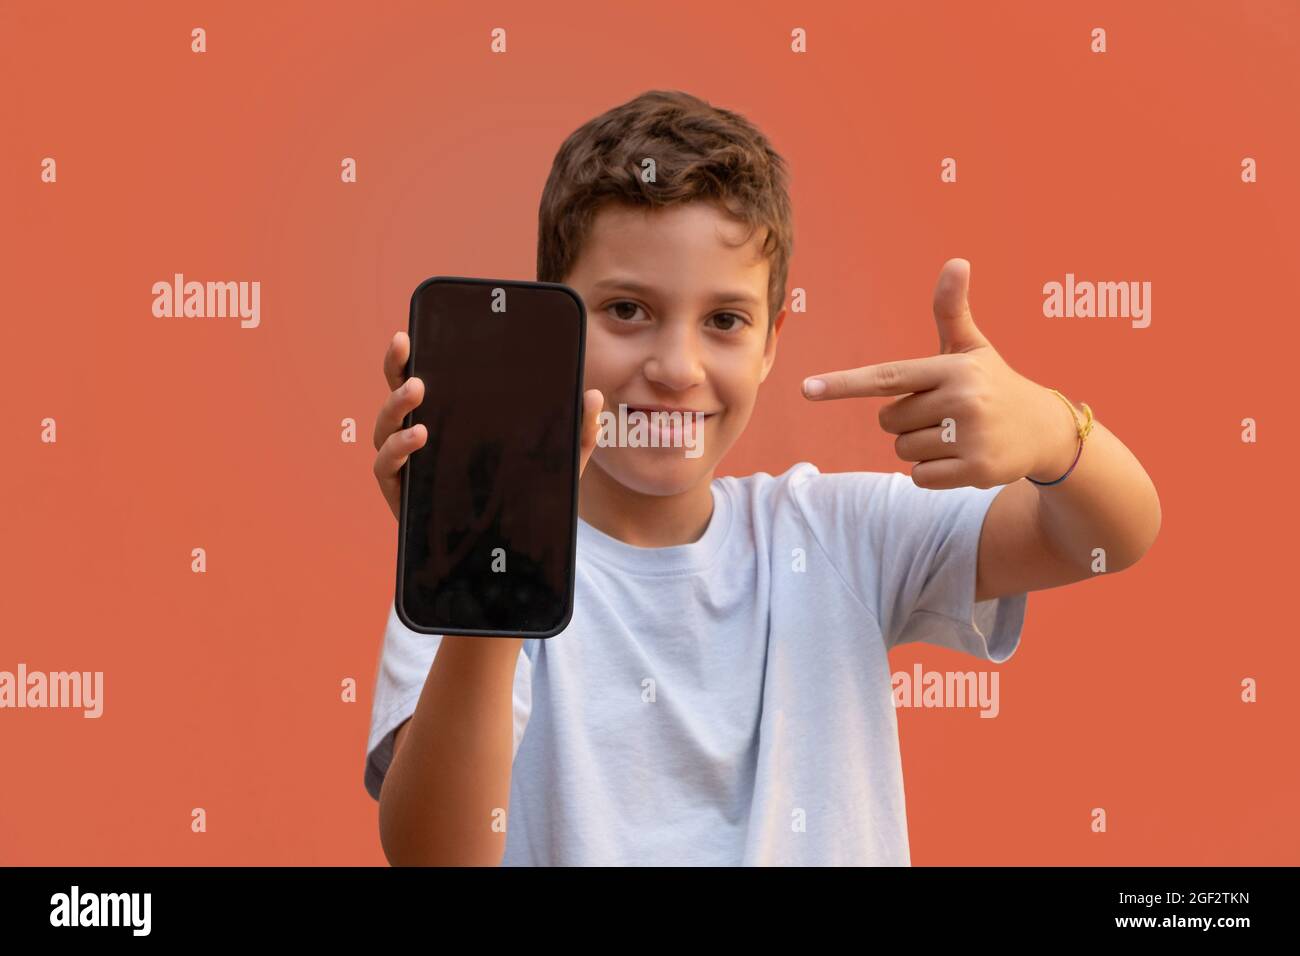 Young caucasian little boy showing a smartphone display screen. Useful for layout app or website advertisement. Looking at camera. Stock Photo